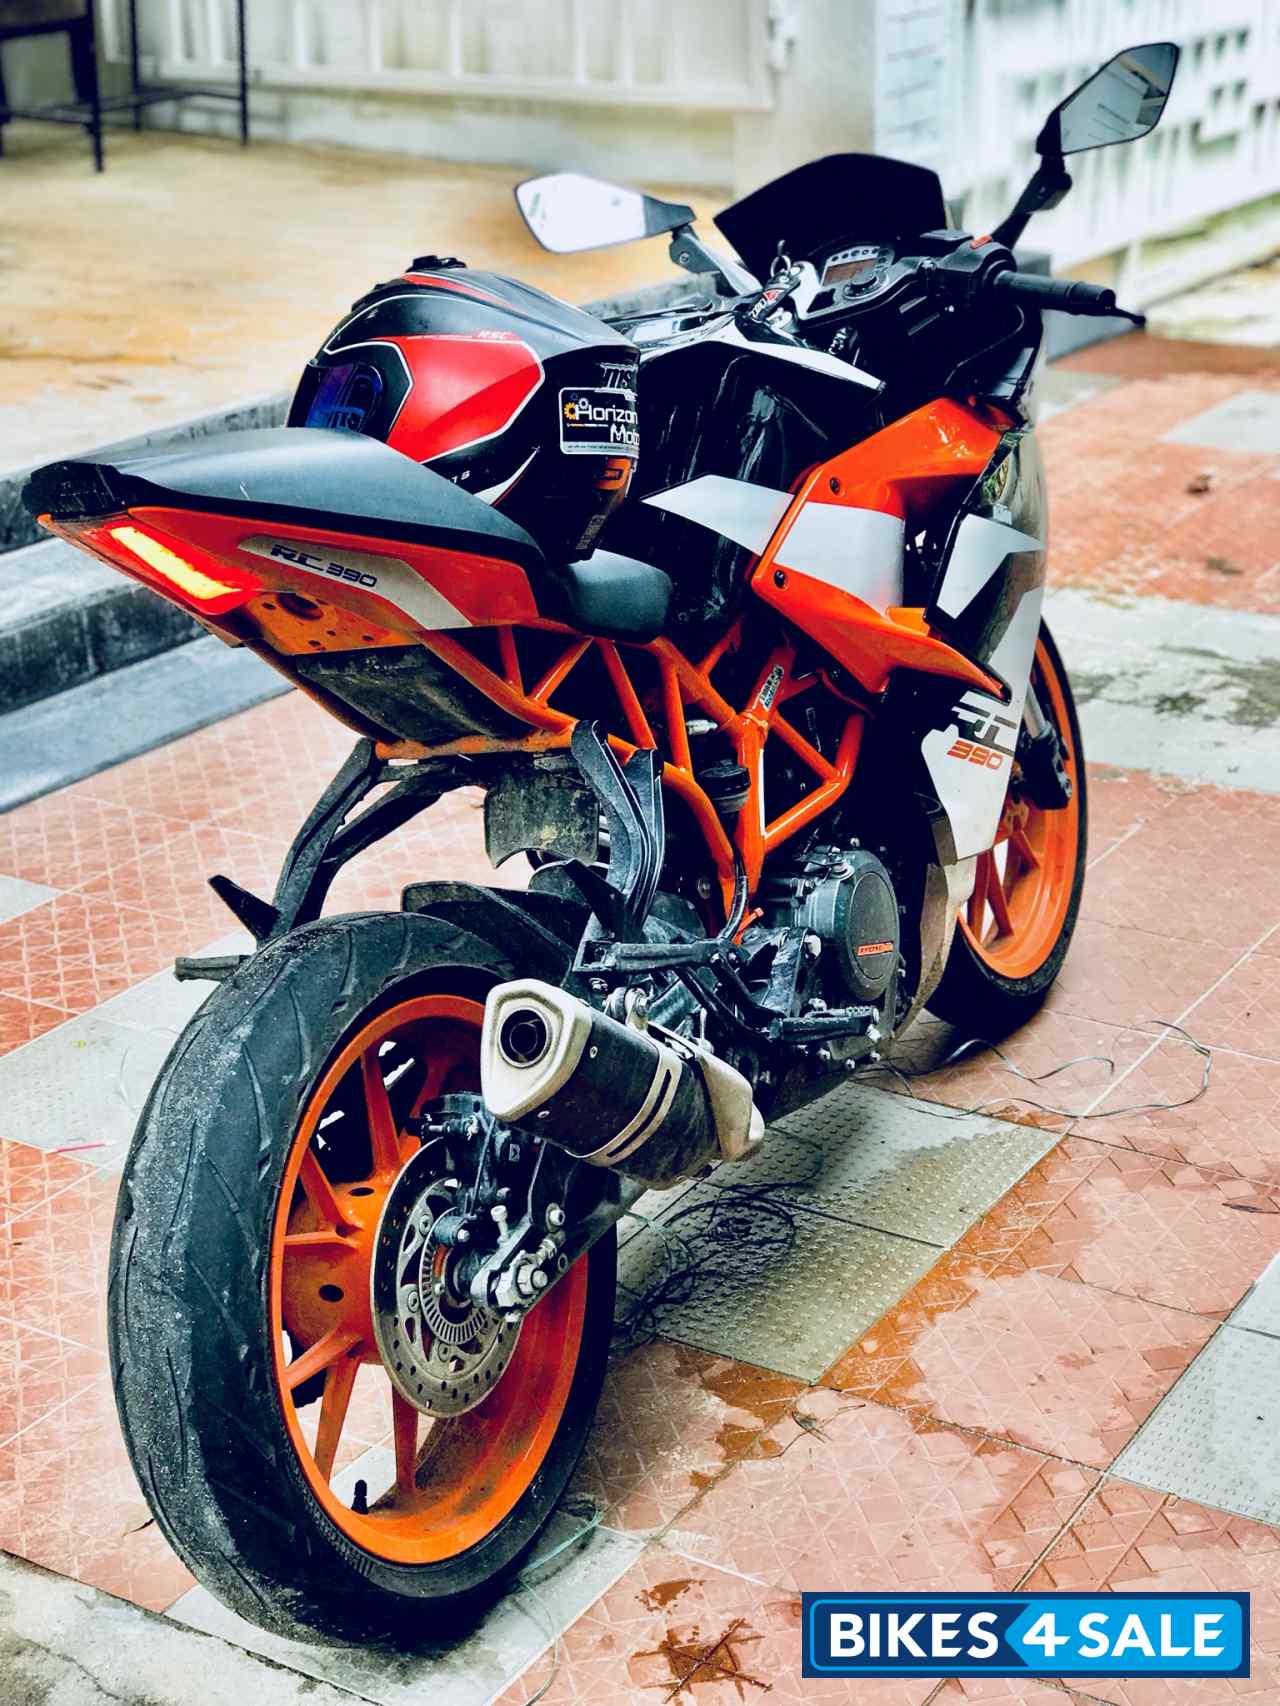 Used 2017 model KTM RC 390 for sale in Hyderabad. ID ...